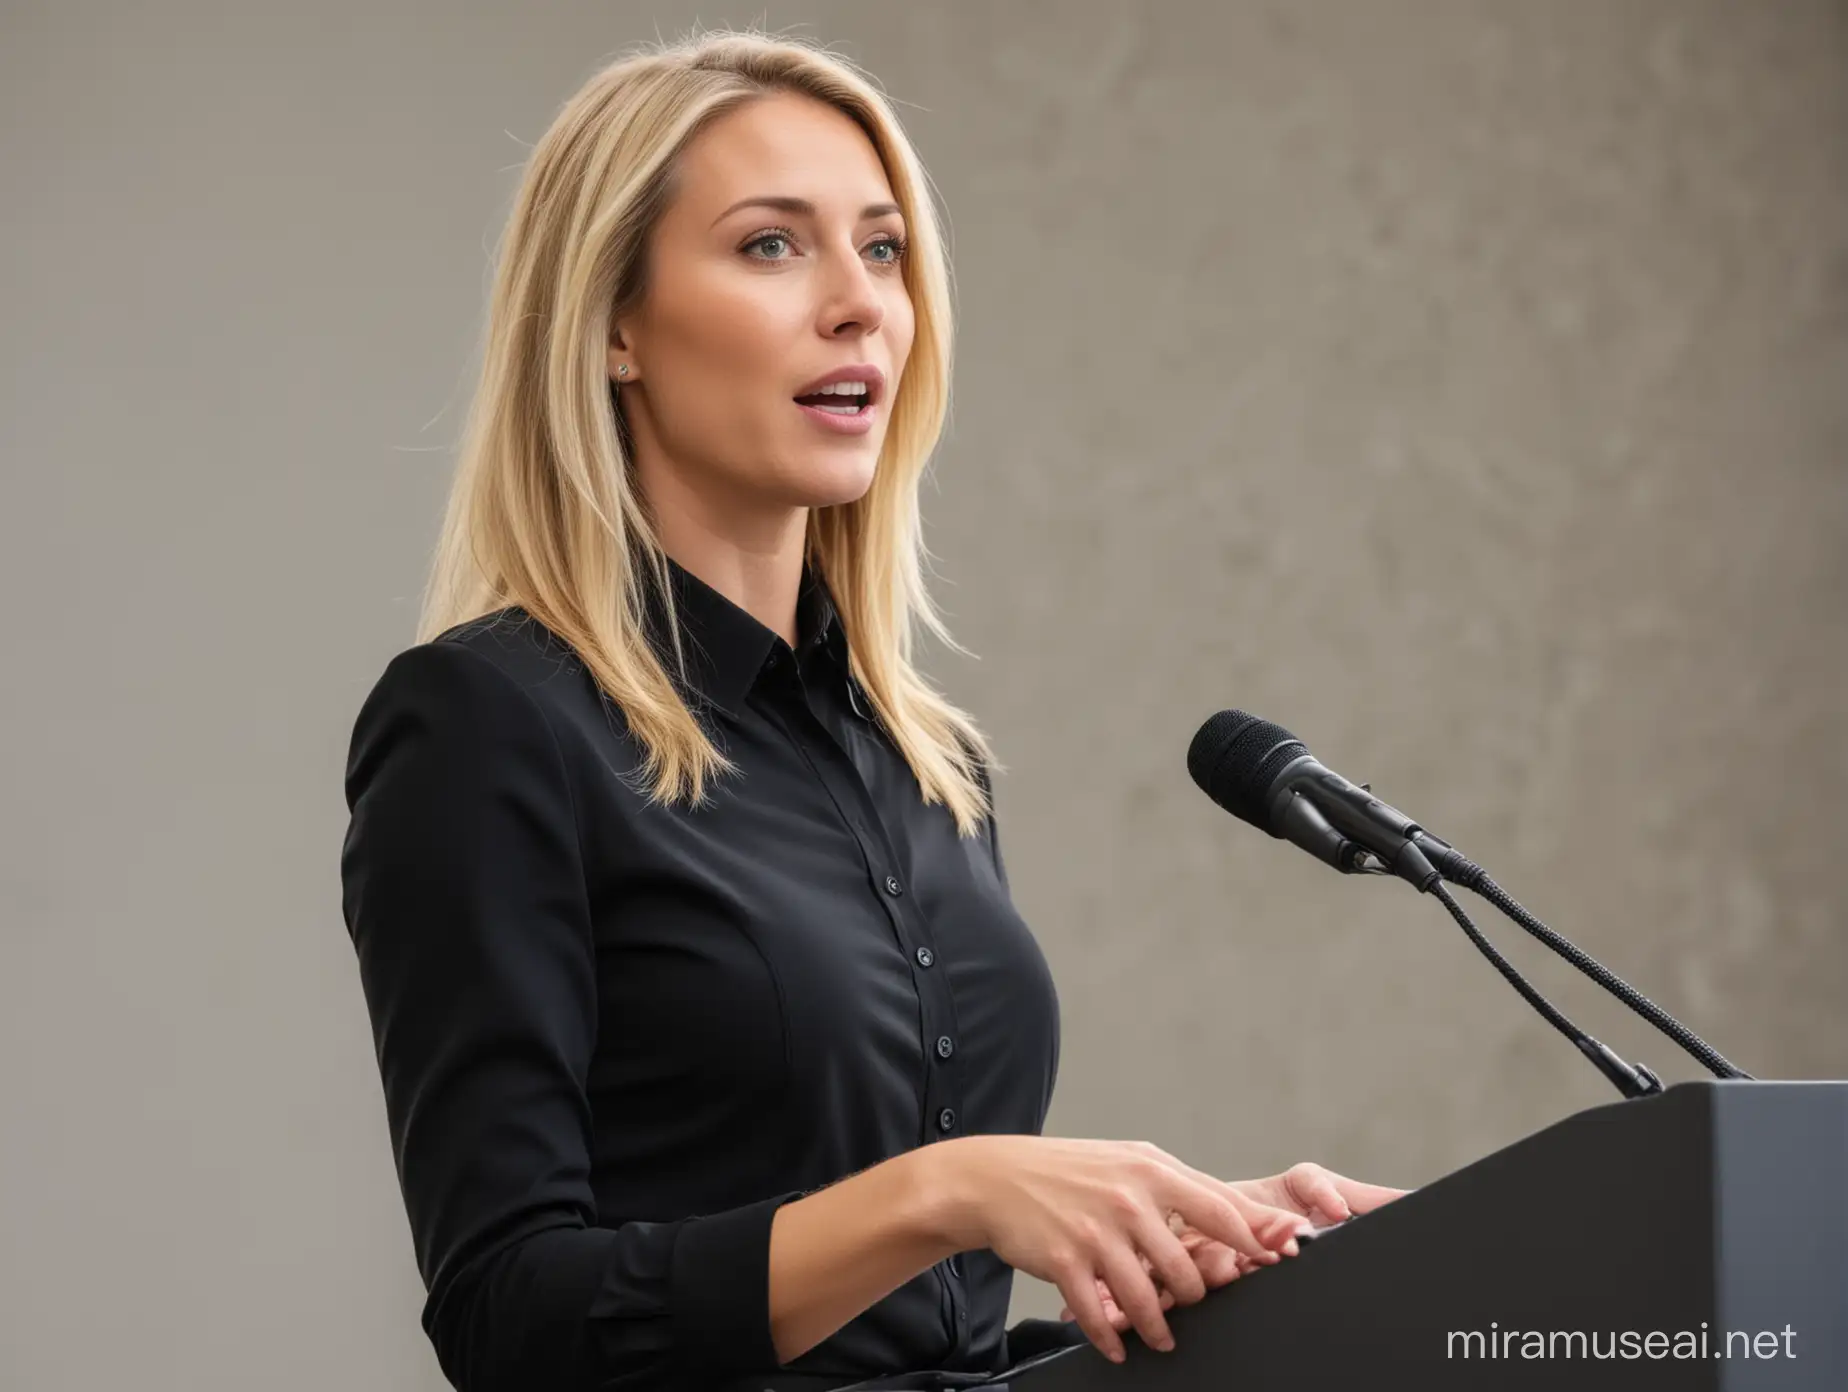 Blonde Woman in Black Business Casual Attire Delivering Speech